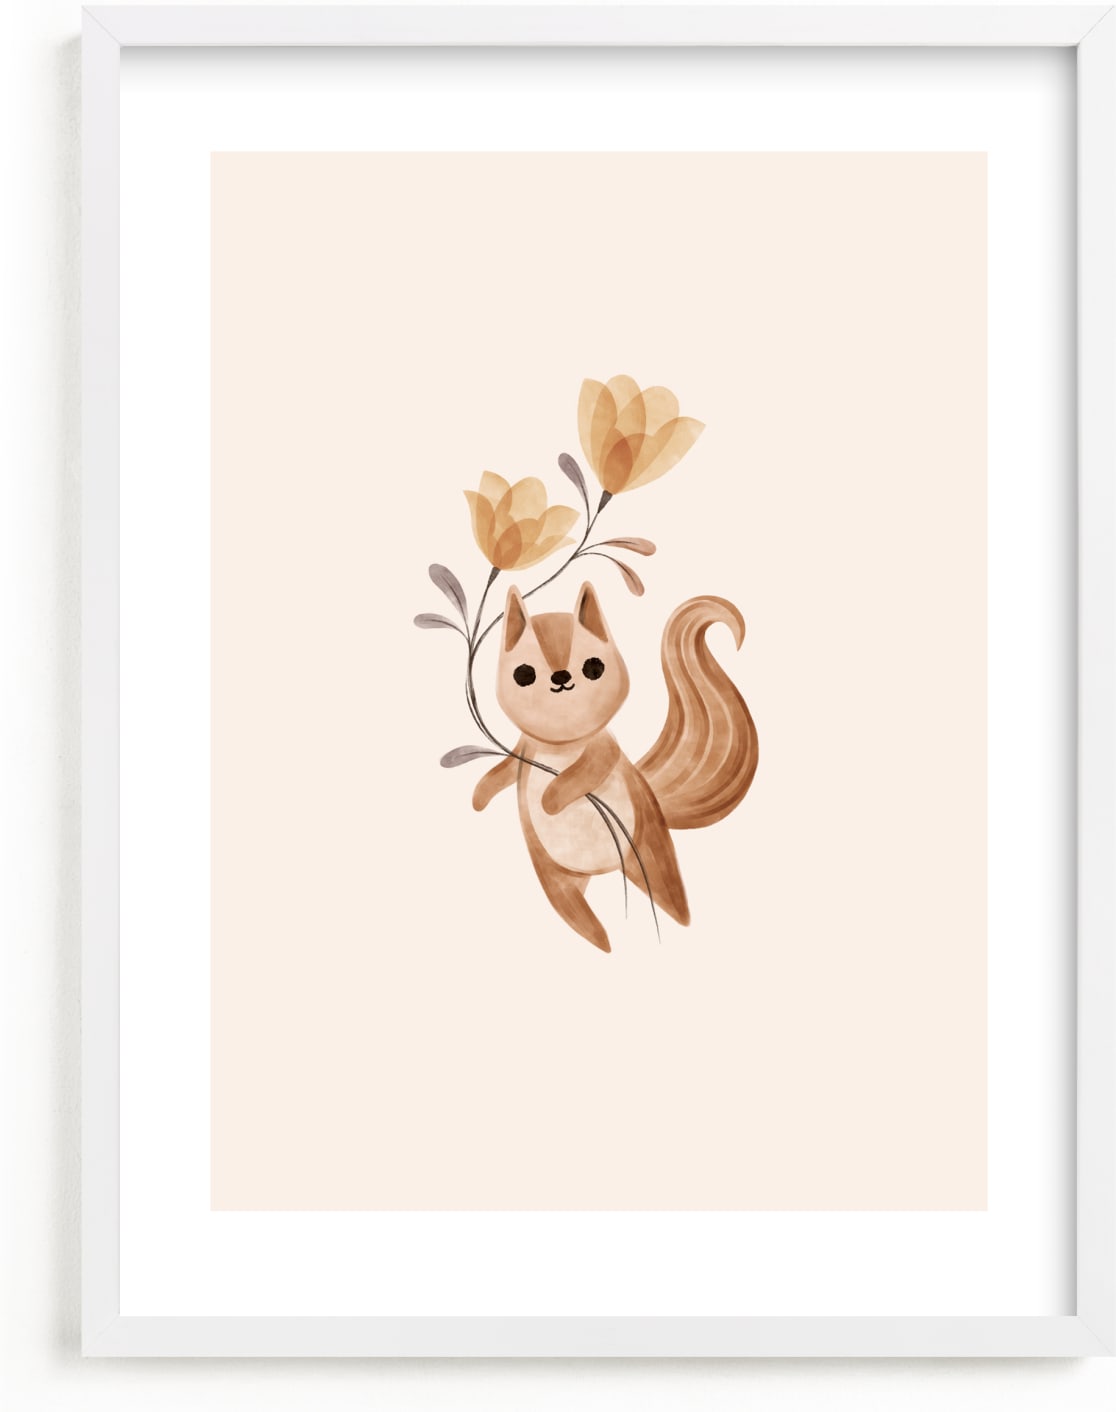 This is a brown nursery wall art by Vivian Yiwing called squirrel with flowers.